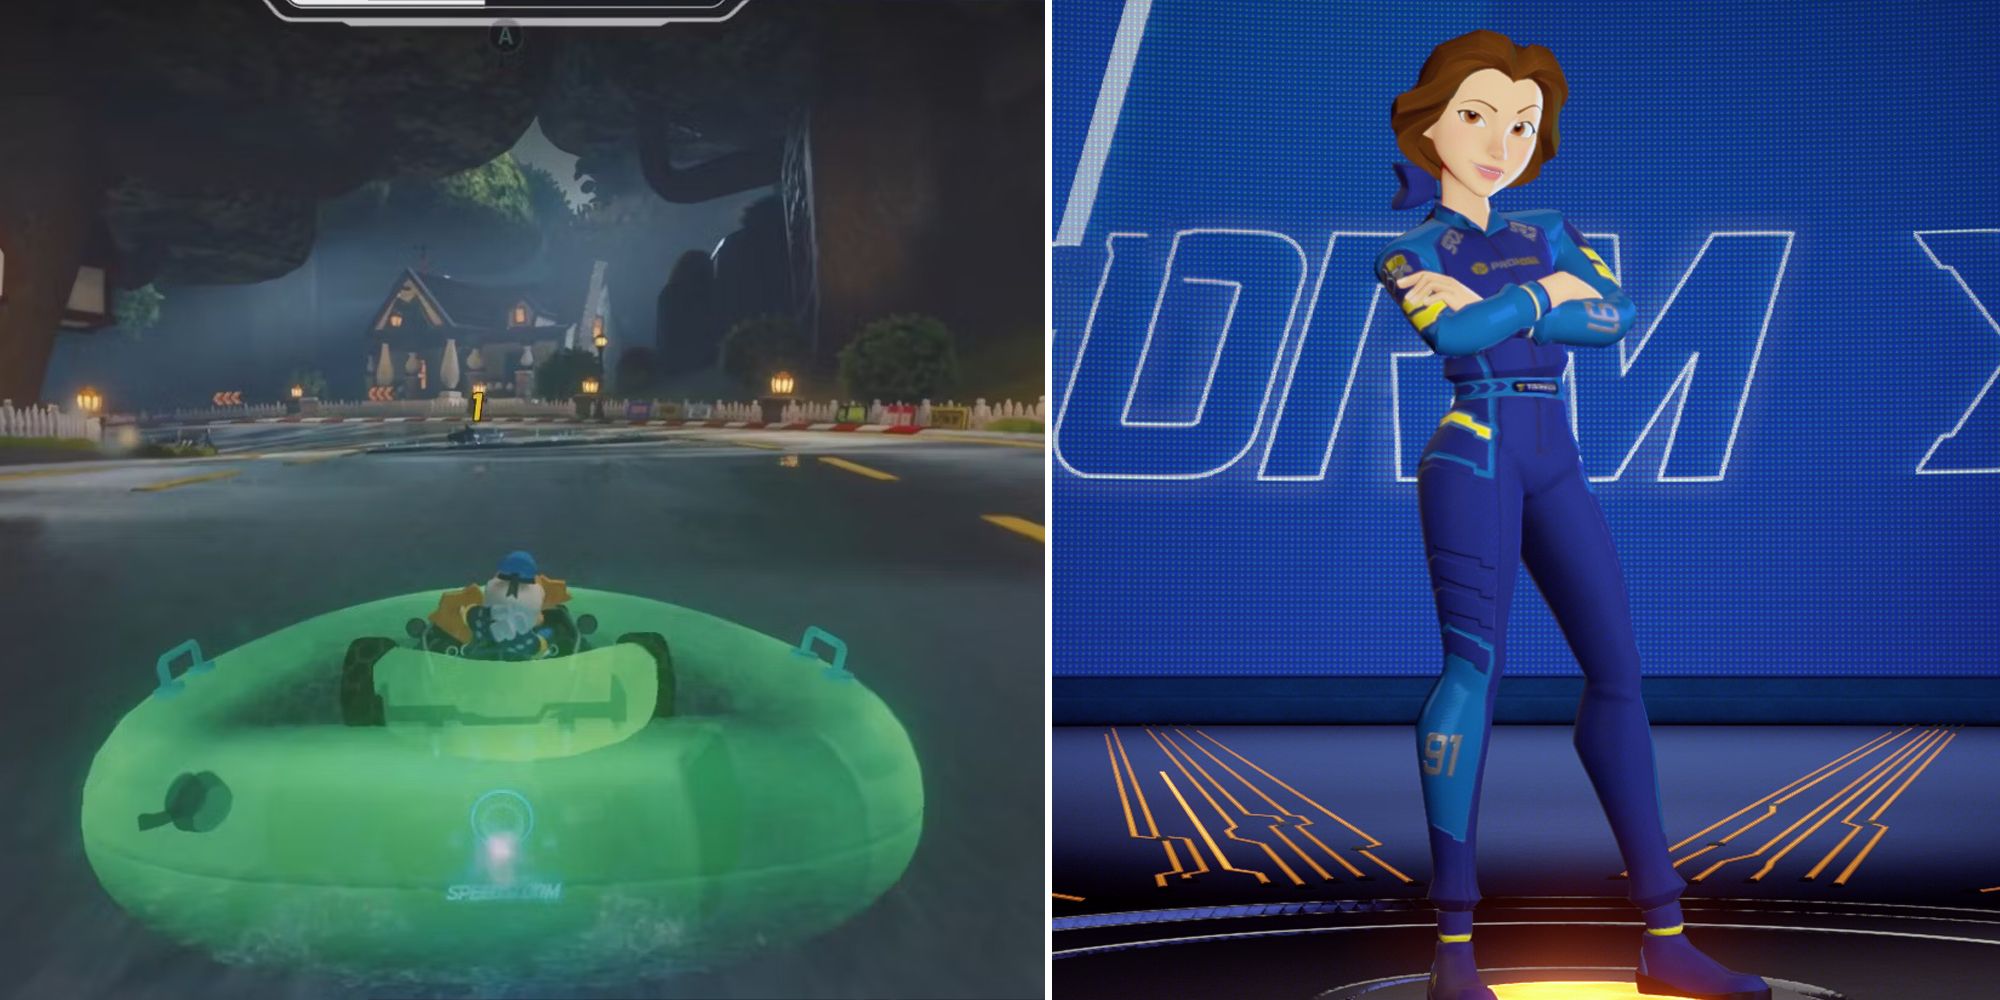 On the left is a screenshot from Disney Speedstorm where Donald Duck is using his ability 'Why I Oughta...'. He is surrounded by a green circle. On the right is Belle stood in the main menu screen in the Founder's Pack blue racing suit.